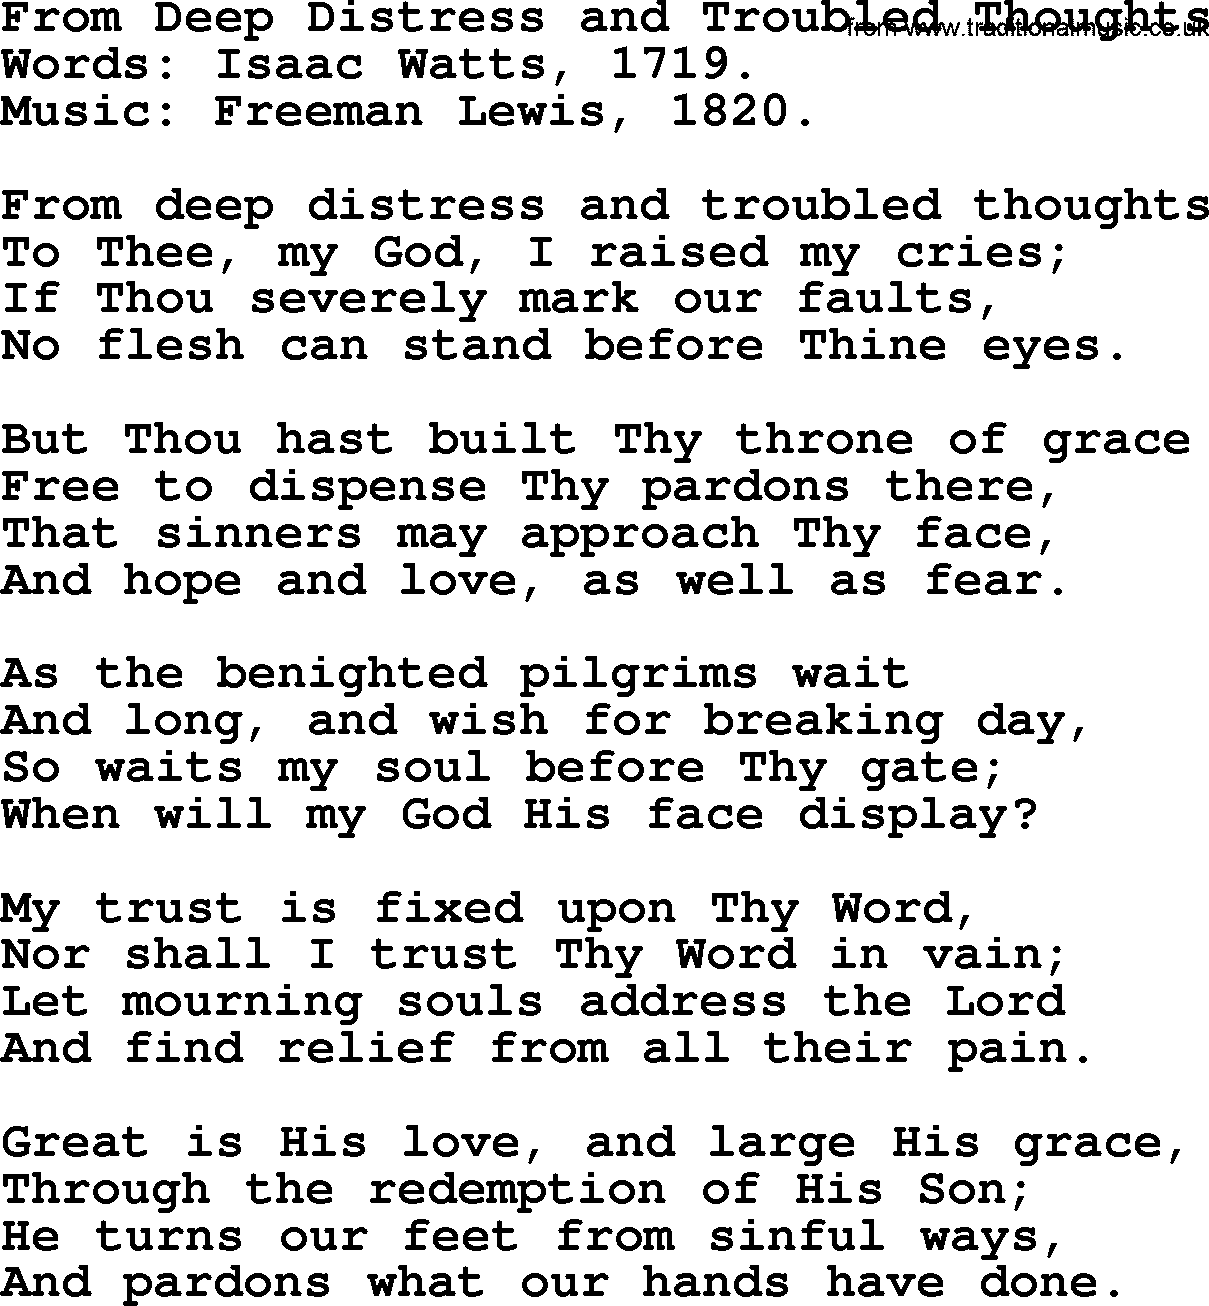 Isaac Watts Christian hymn: From Deep Distress and Troubled Thoughts- lyricss